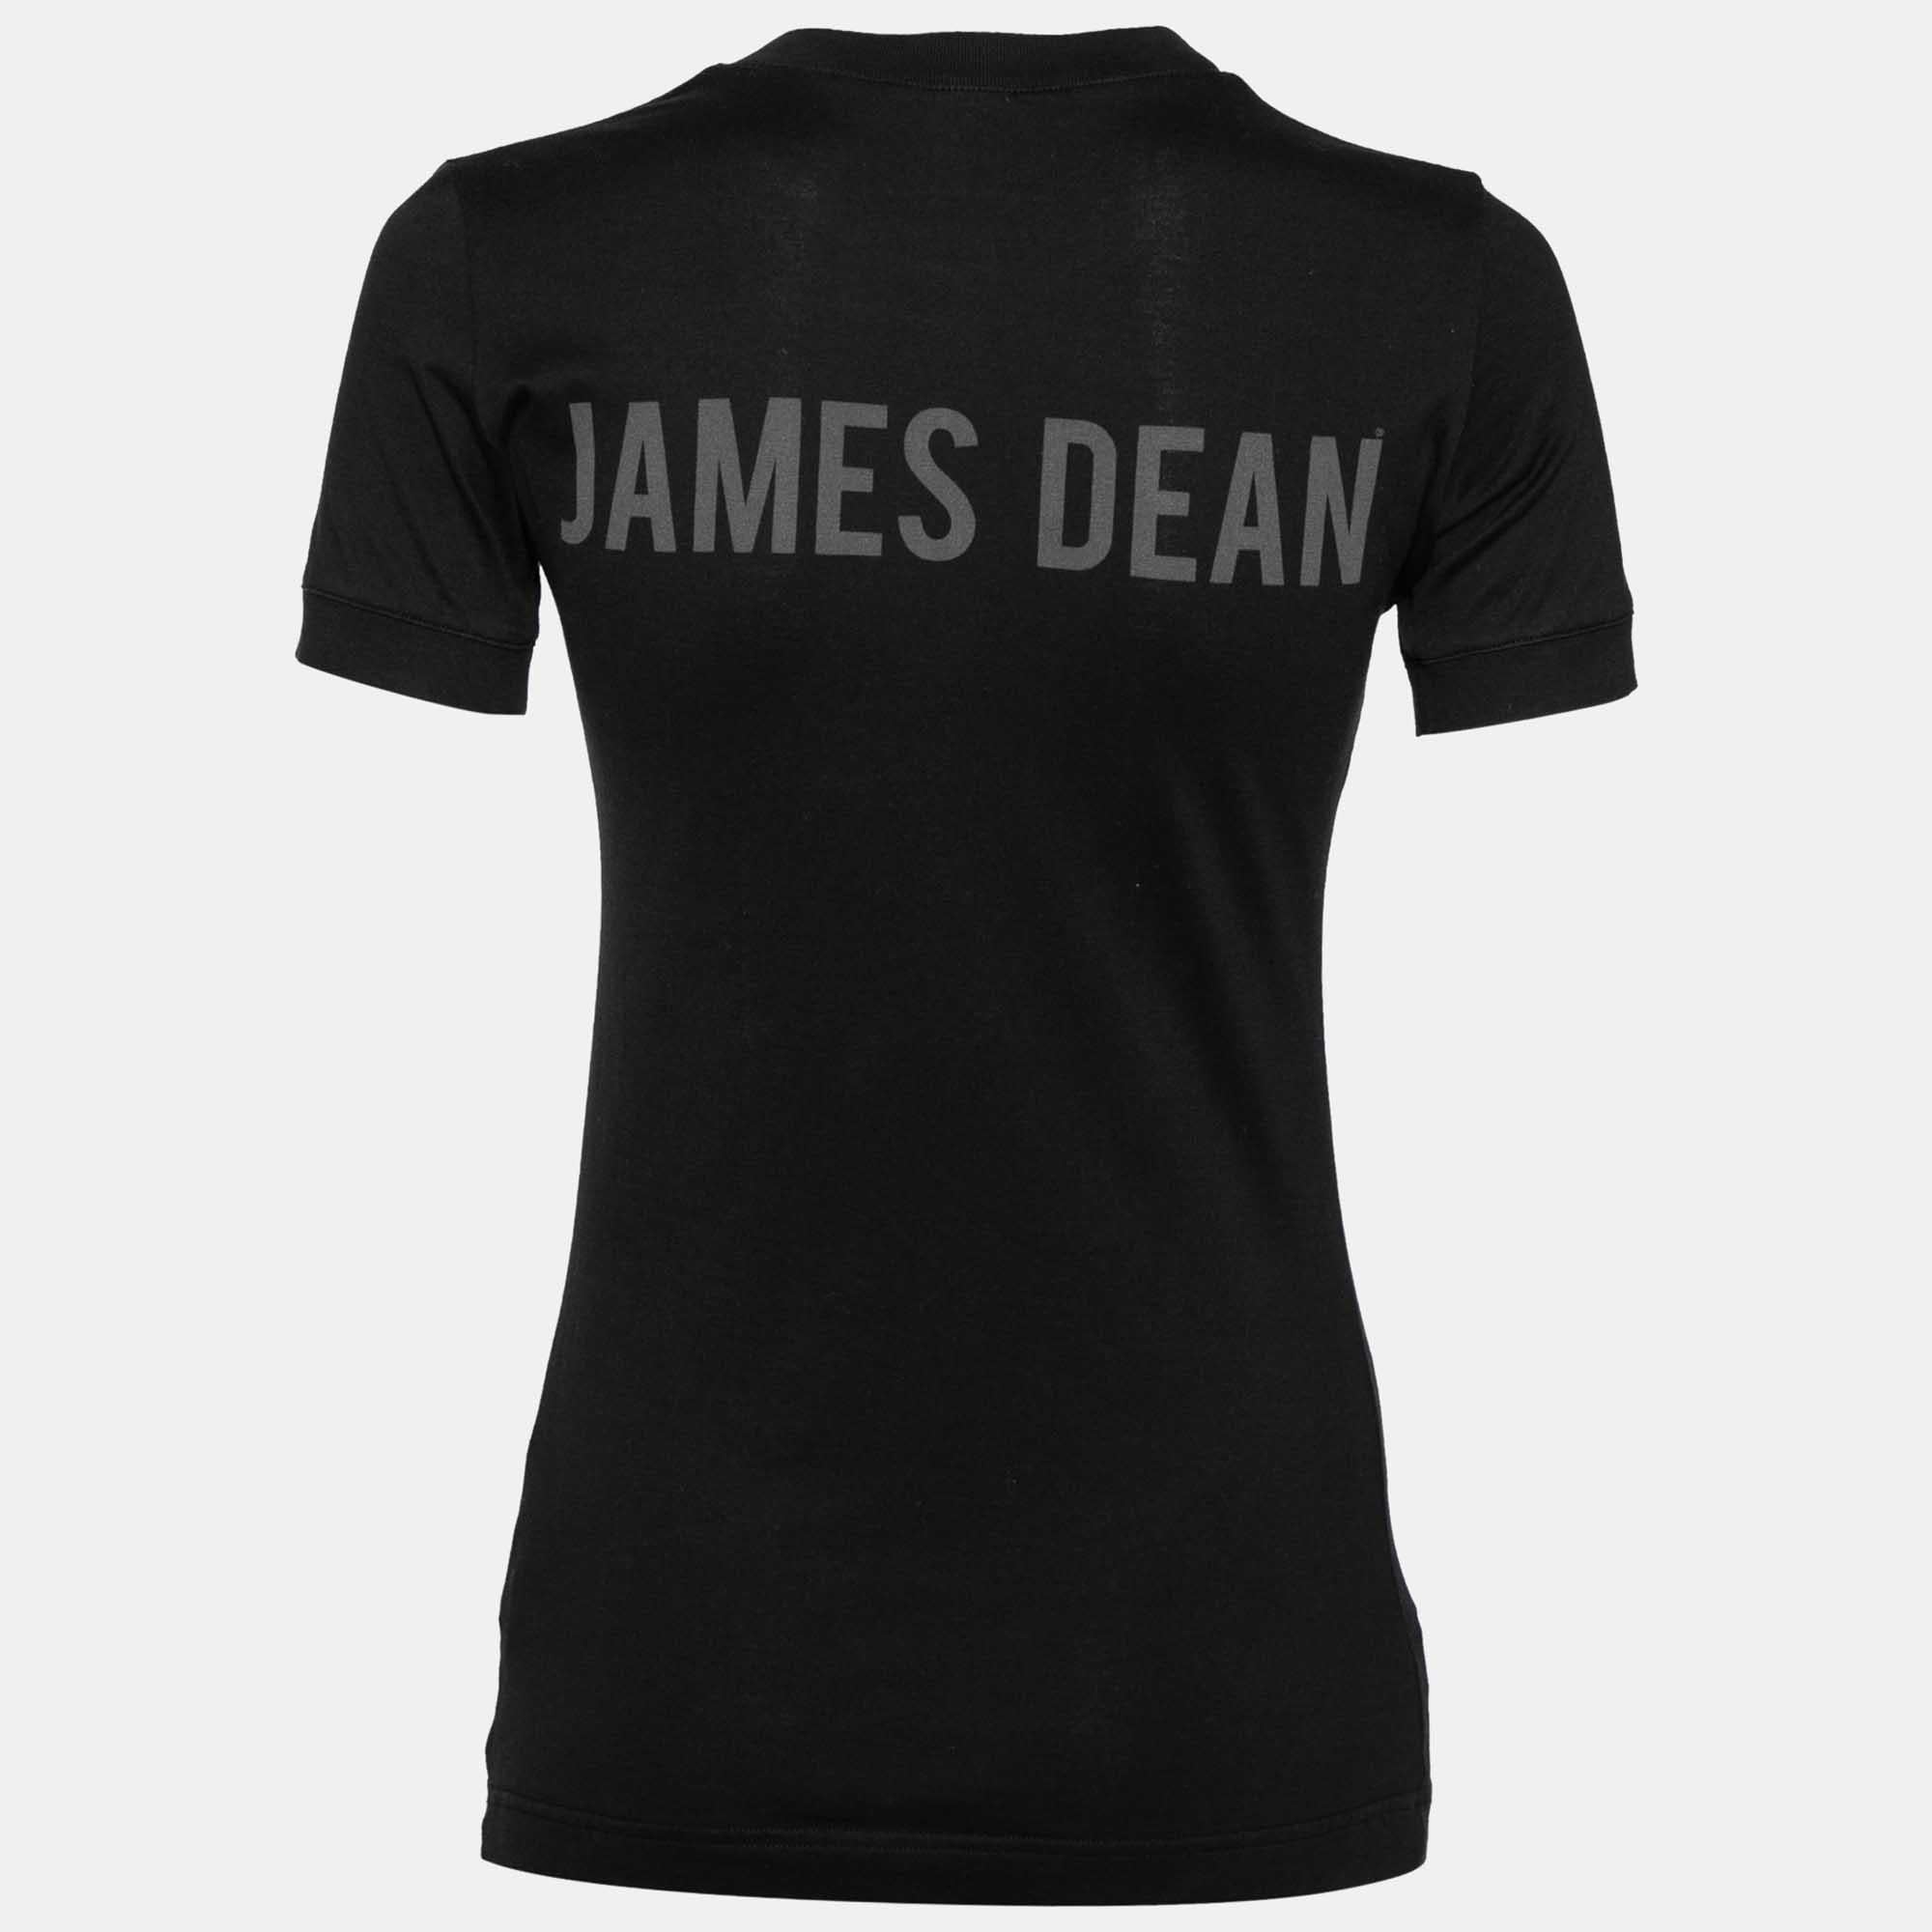 The house of Dolce & Gabbana exhibits its mastery in crafting classic silhouettes and lending a free-flowing look through this piece. This chic T-shirt is made with black cotton and features a James Dean print on the front. Spend the day comfortably